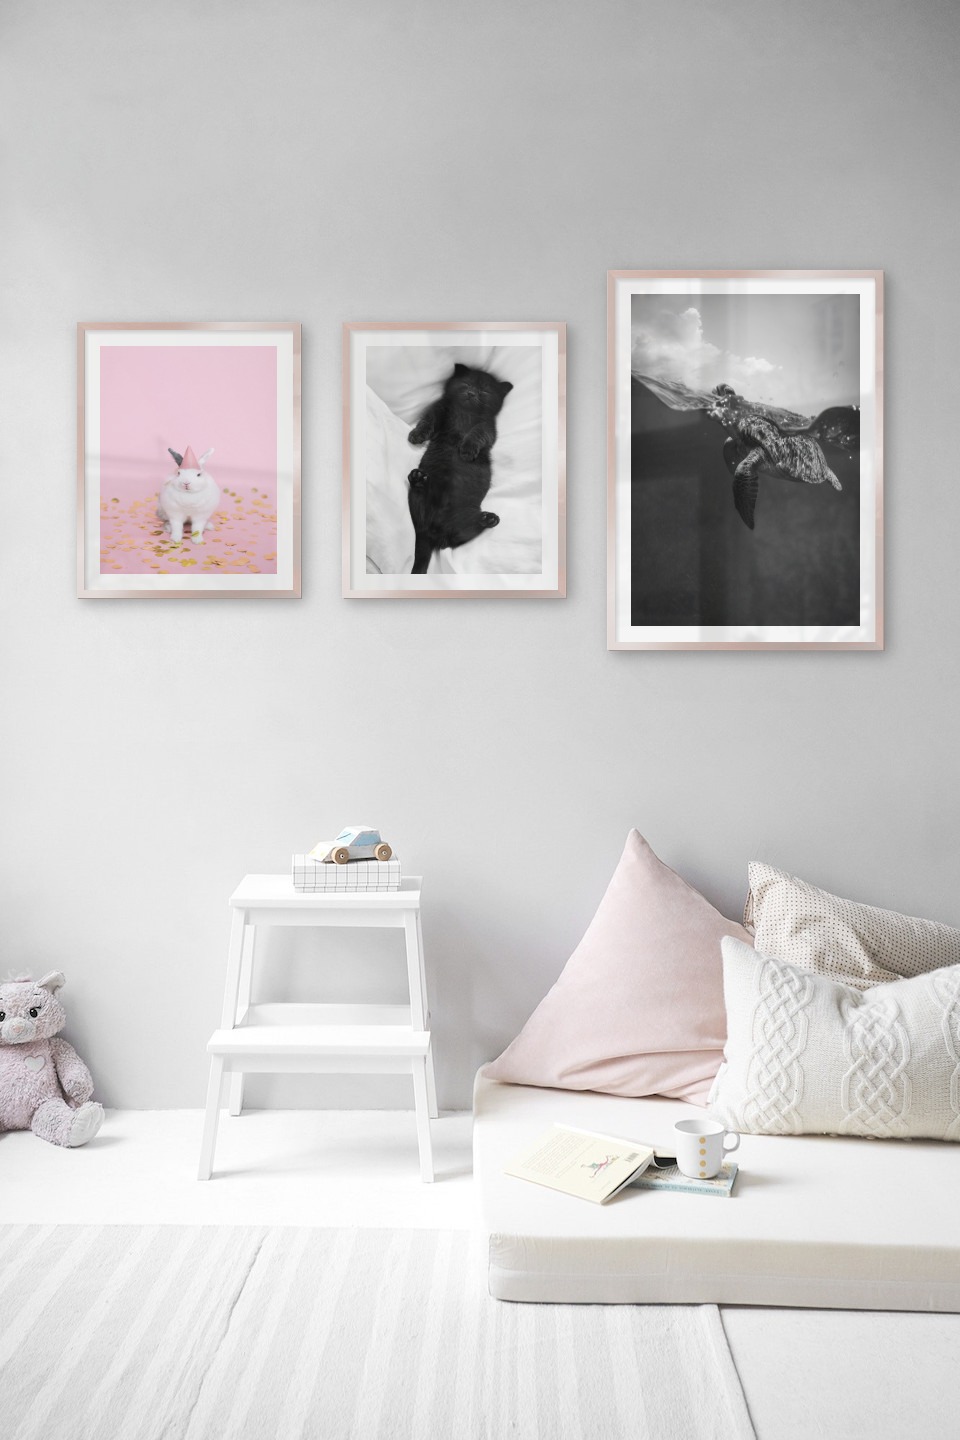 Gallery wall with picture frames in copper in sizes 40x50 and 50x70 with prints "Rabbit with party hat", "Cat in bed" and "Turtle"